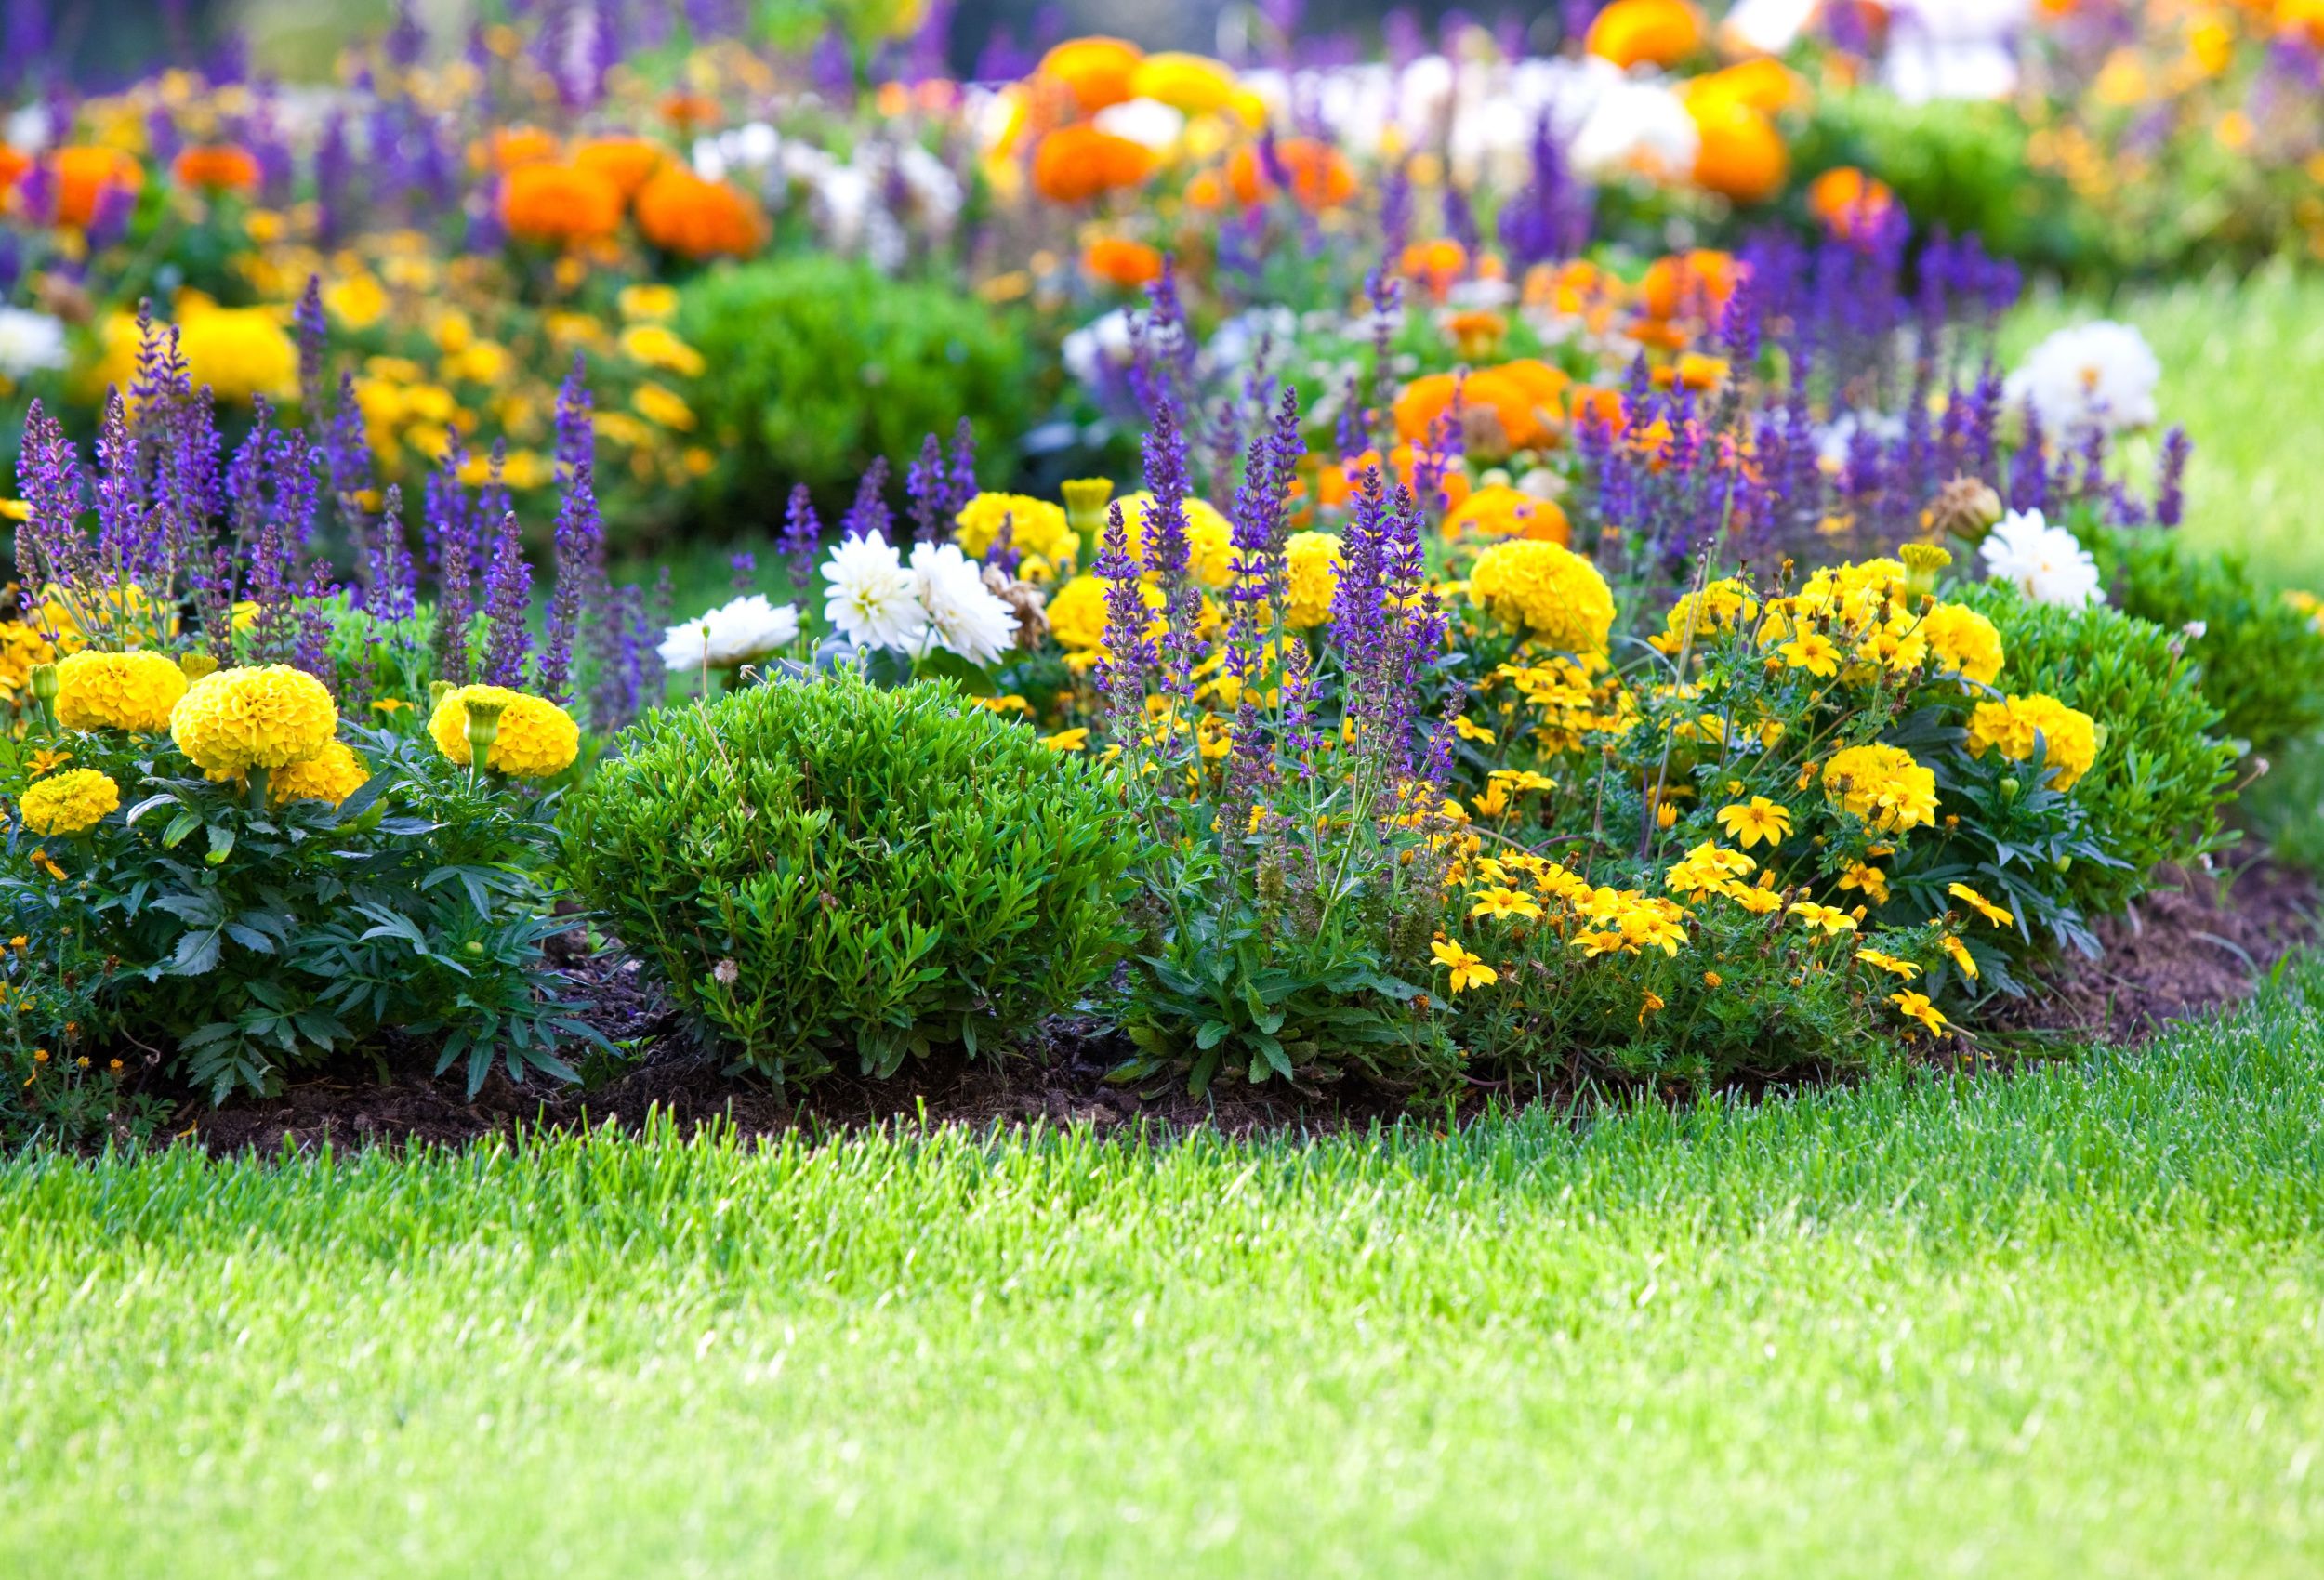 multicolored flowerbed on a lawn